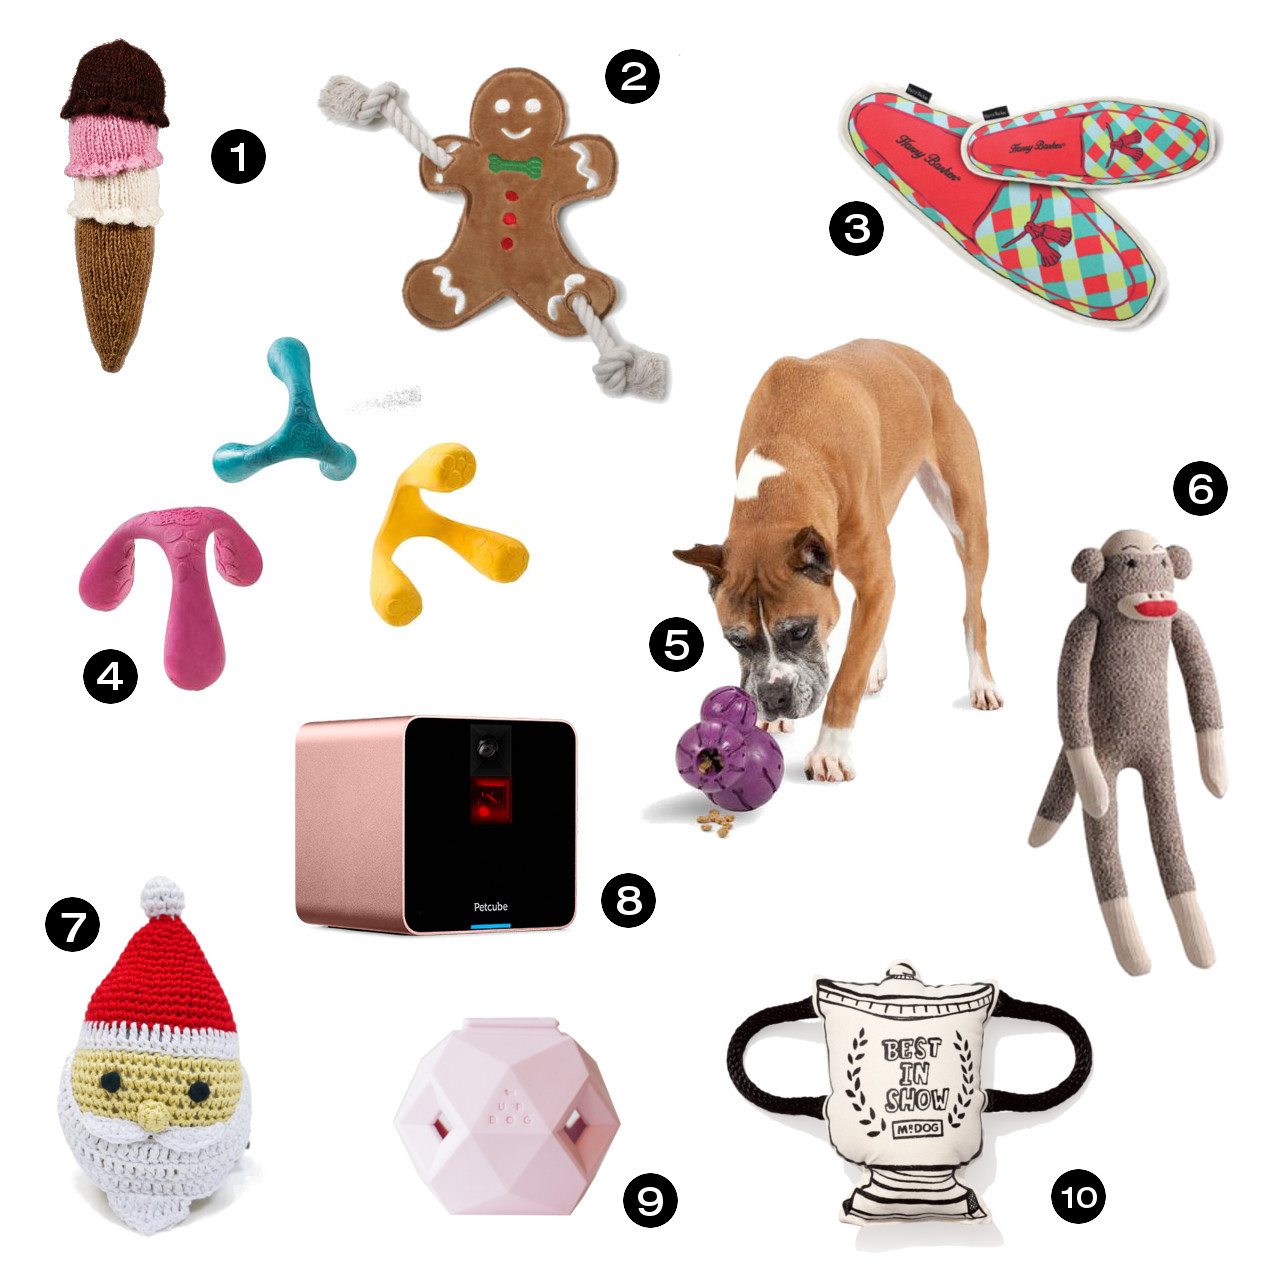 Dog Milk Holiday Gift Guide: 12 Cool Toys for Dogs